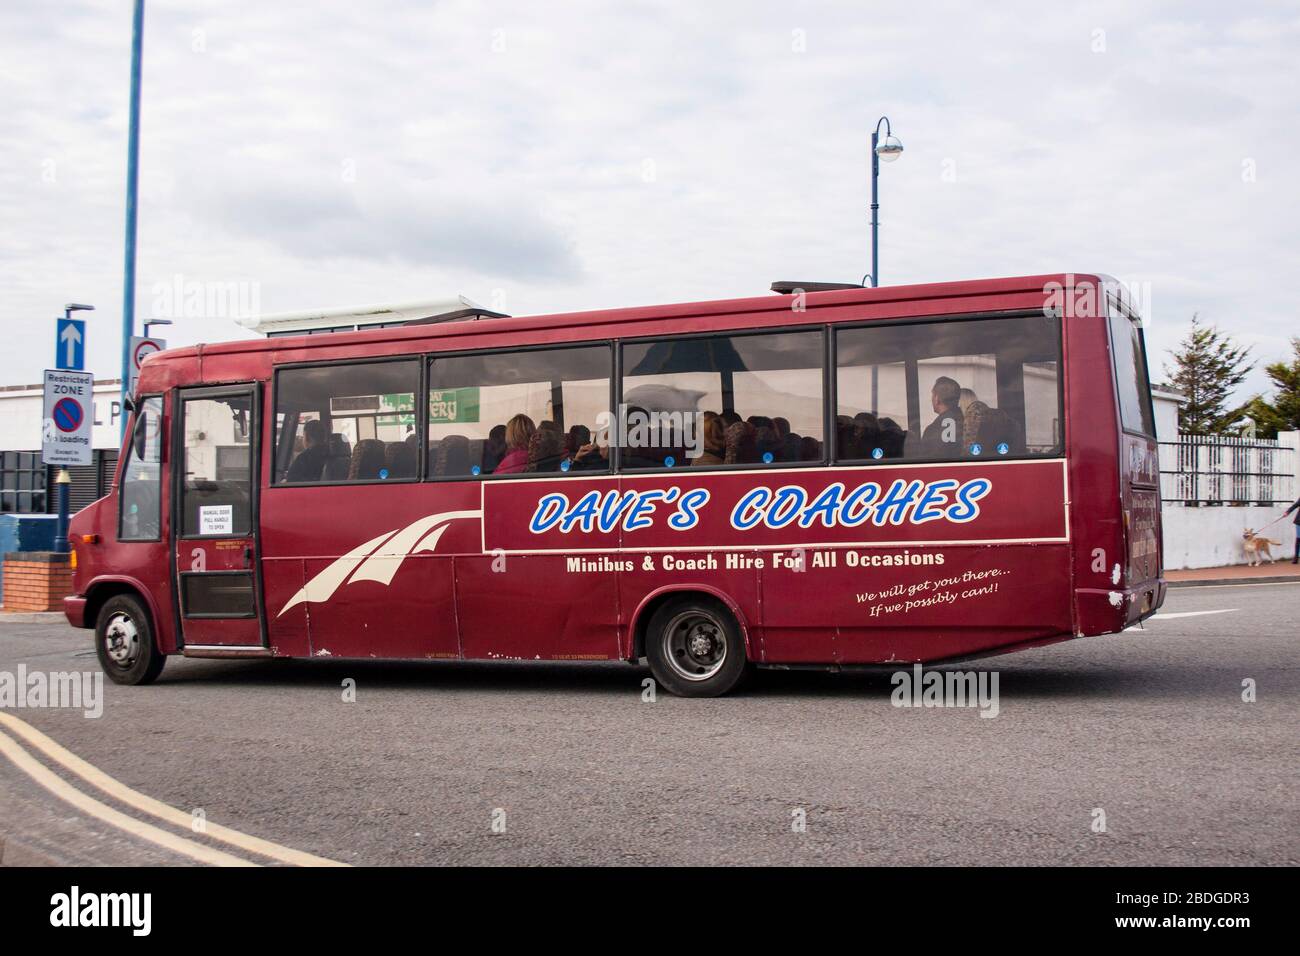 daves-coaches-bus-on-barry-island-wales-2BDGDR3.jpg